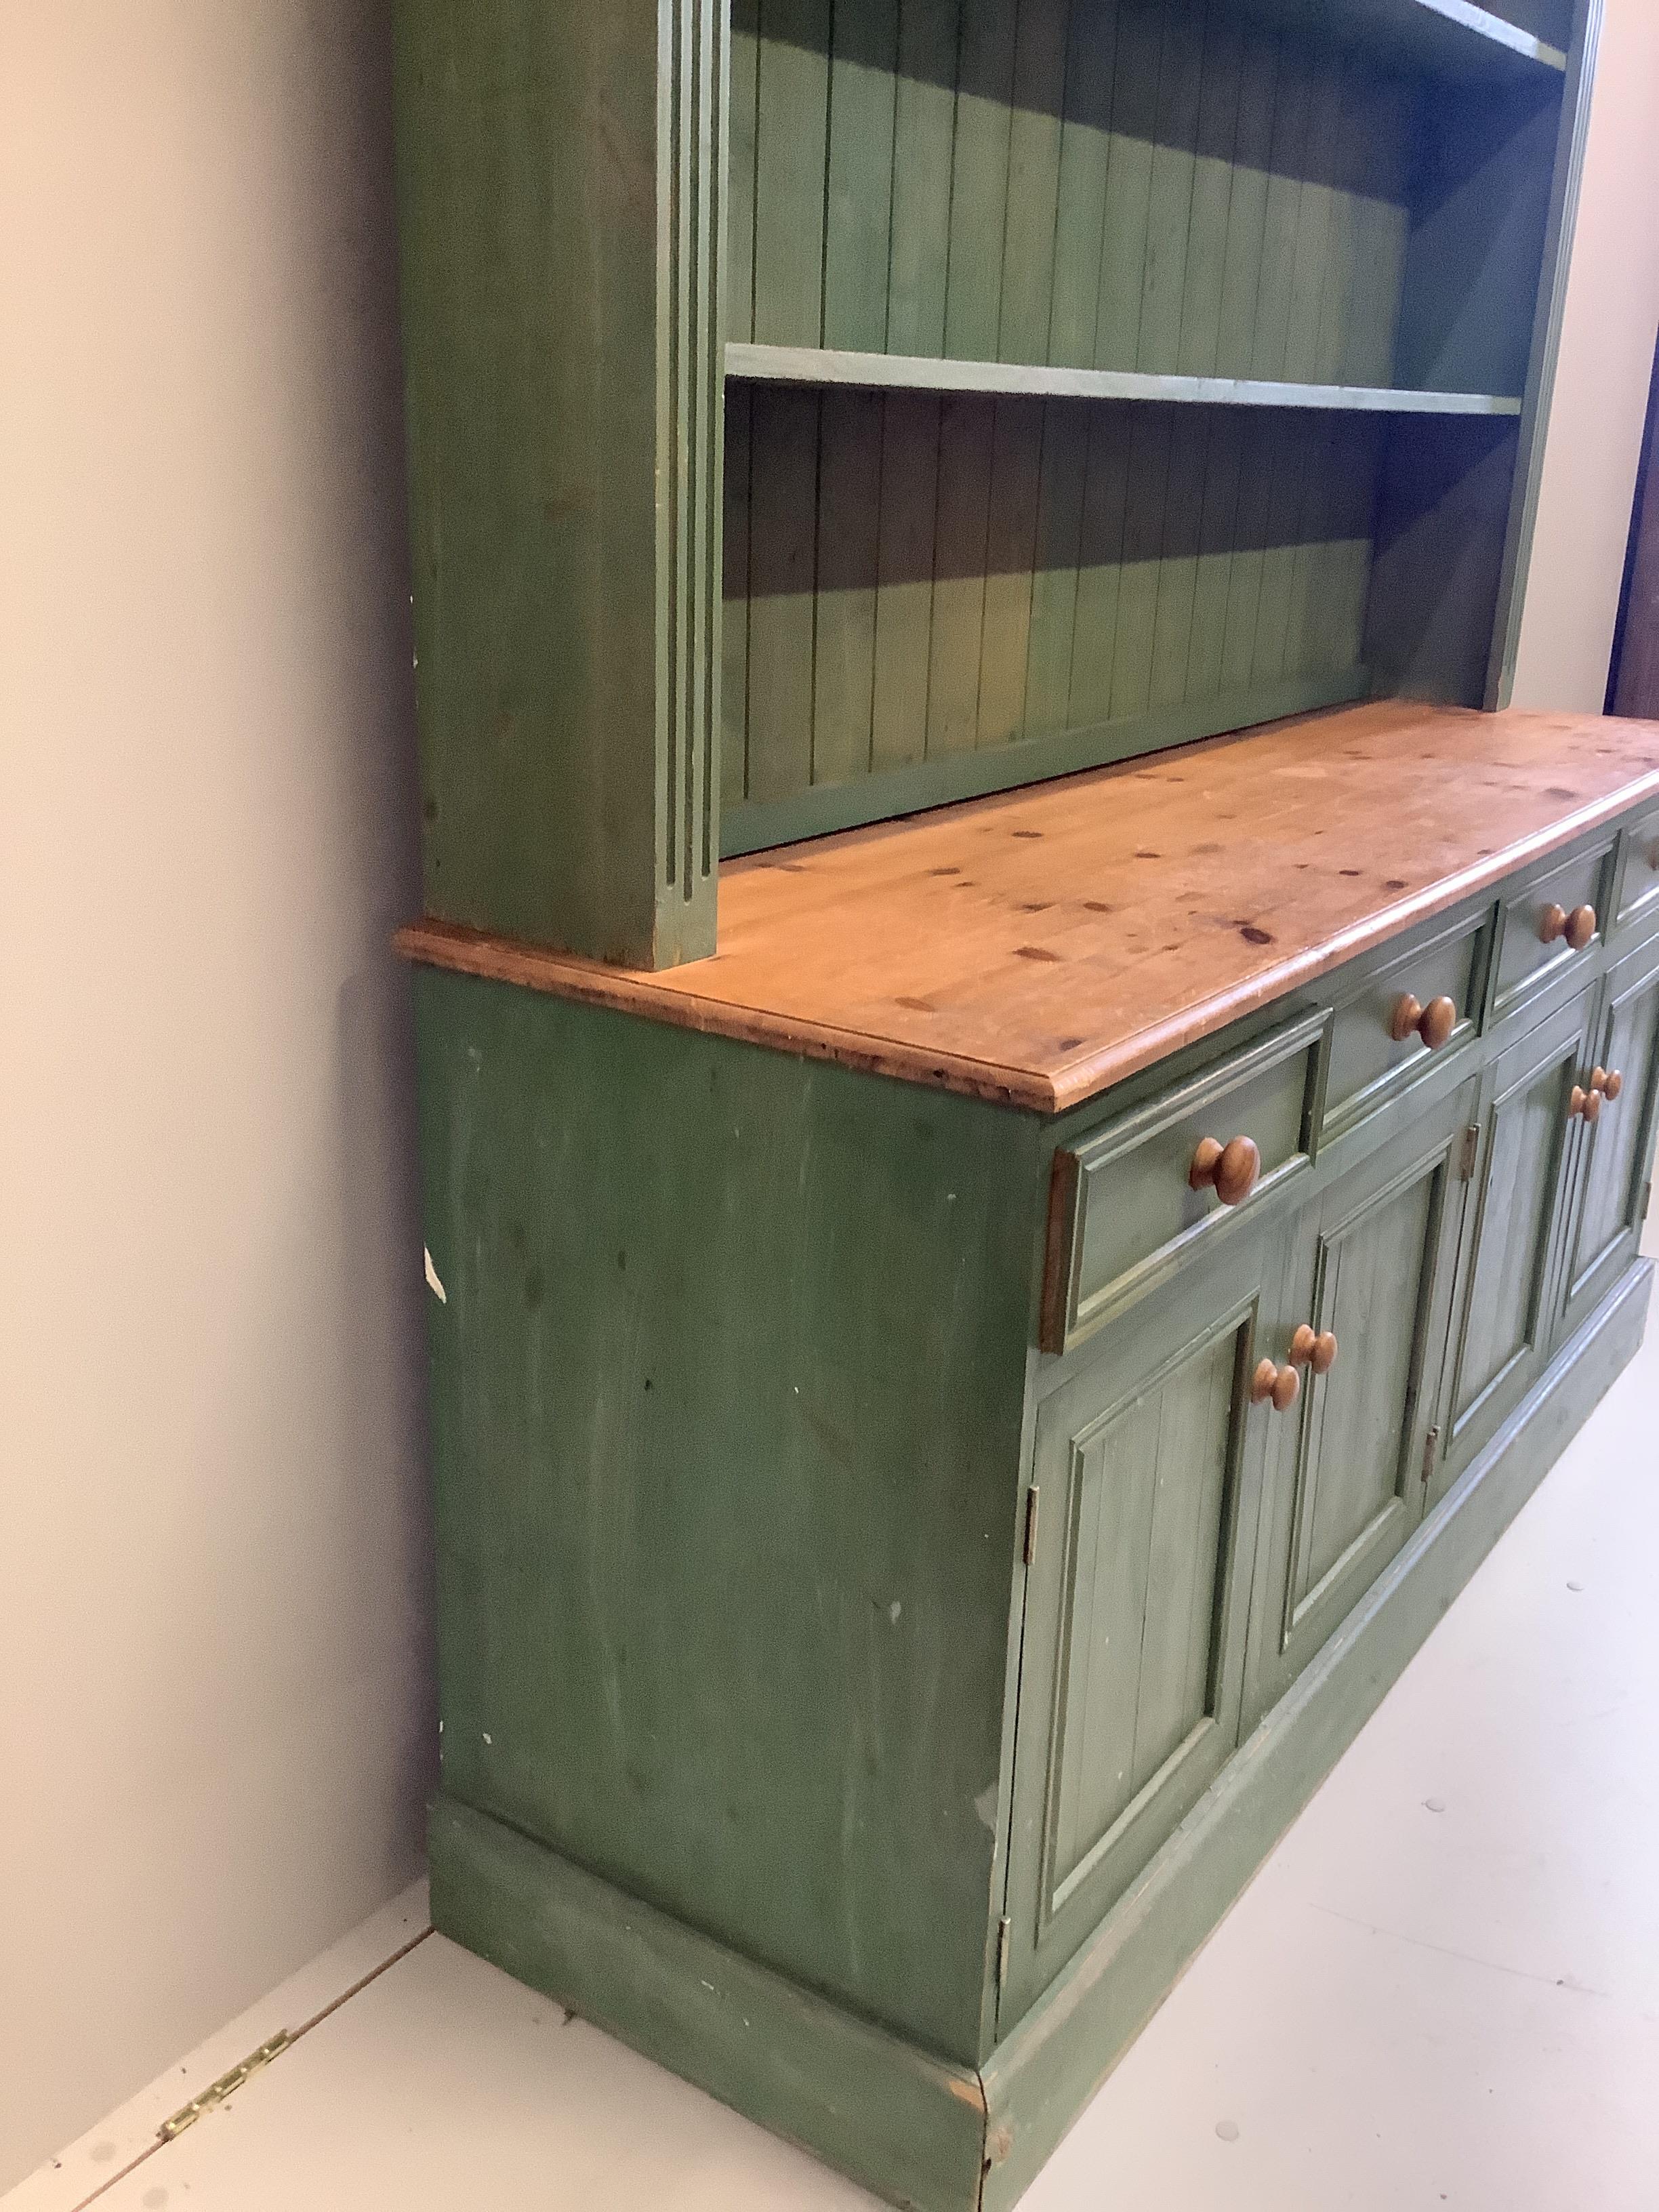 A Victorian style part painted pine dresser with boarded rack, width 172cm, depth 50cm, height 198cm